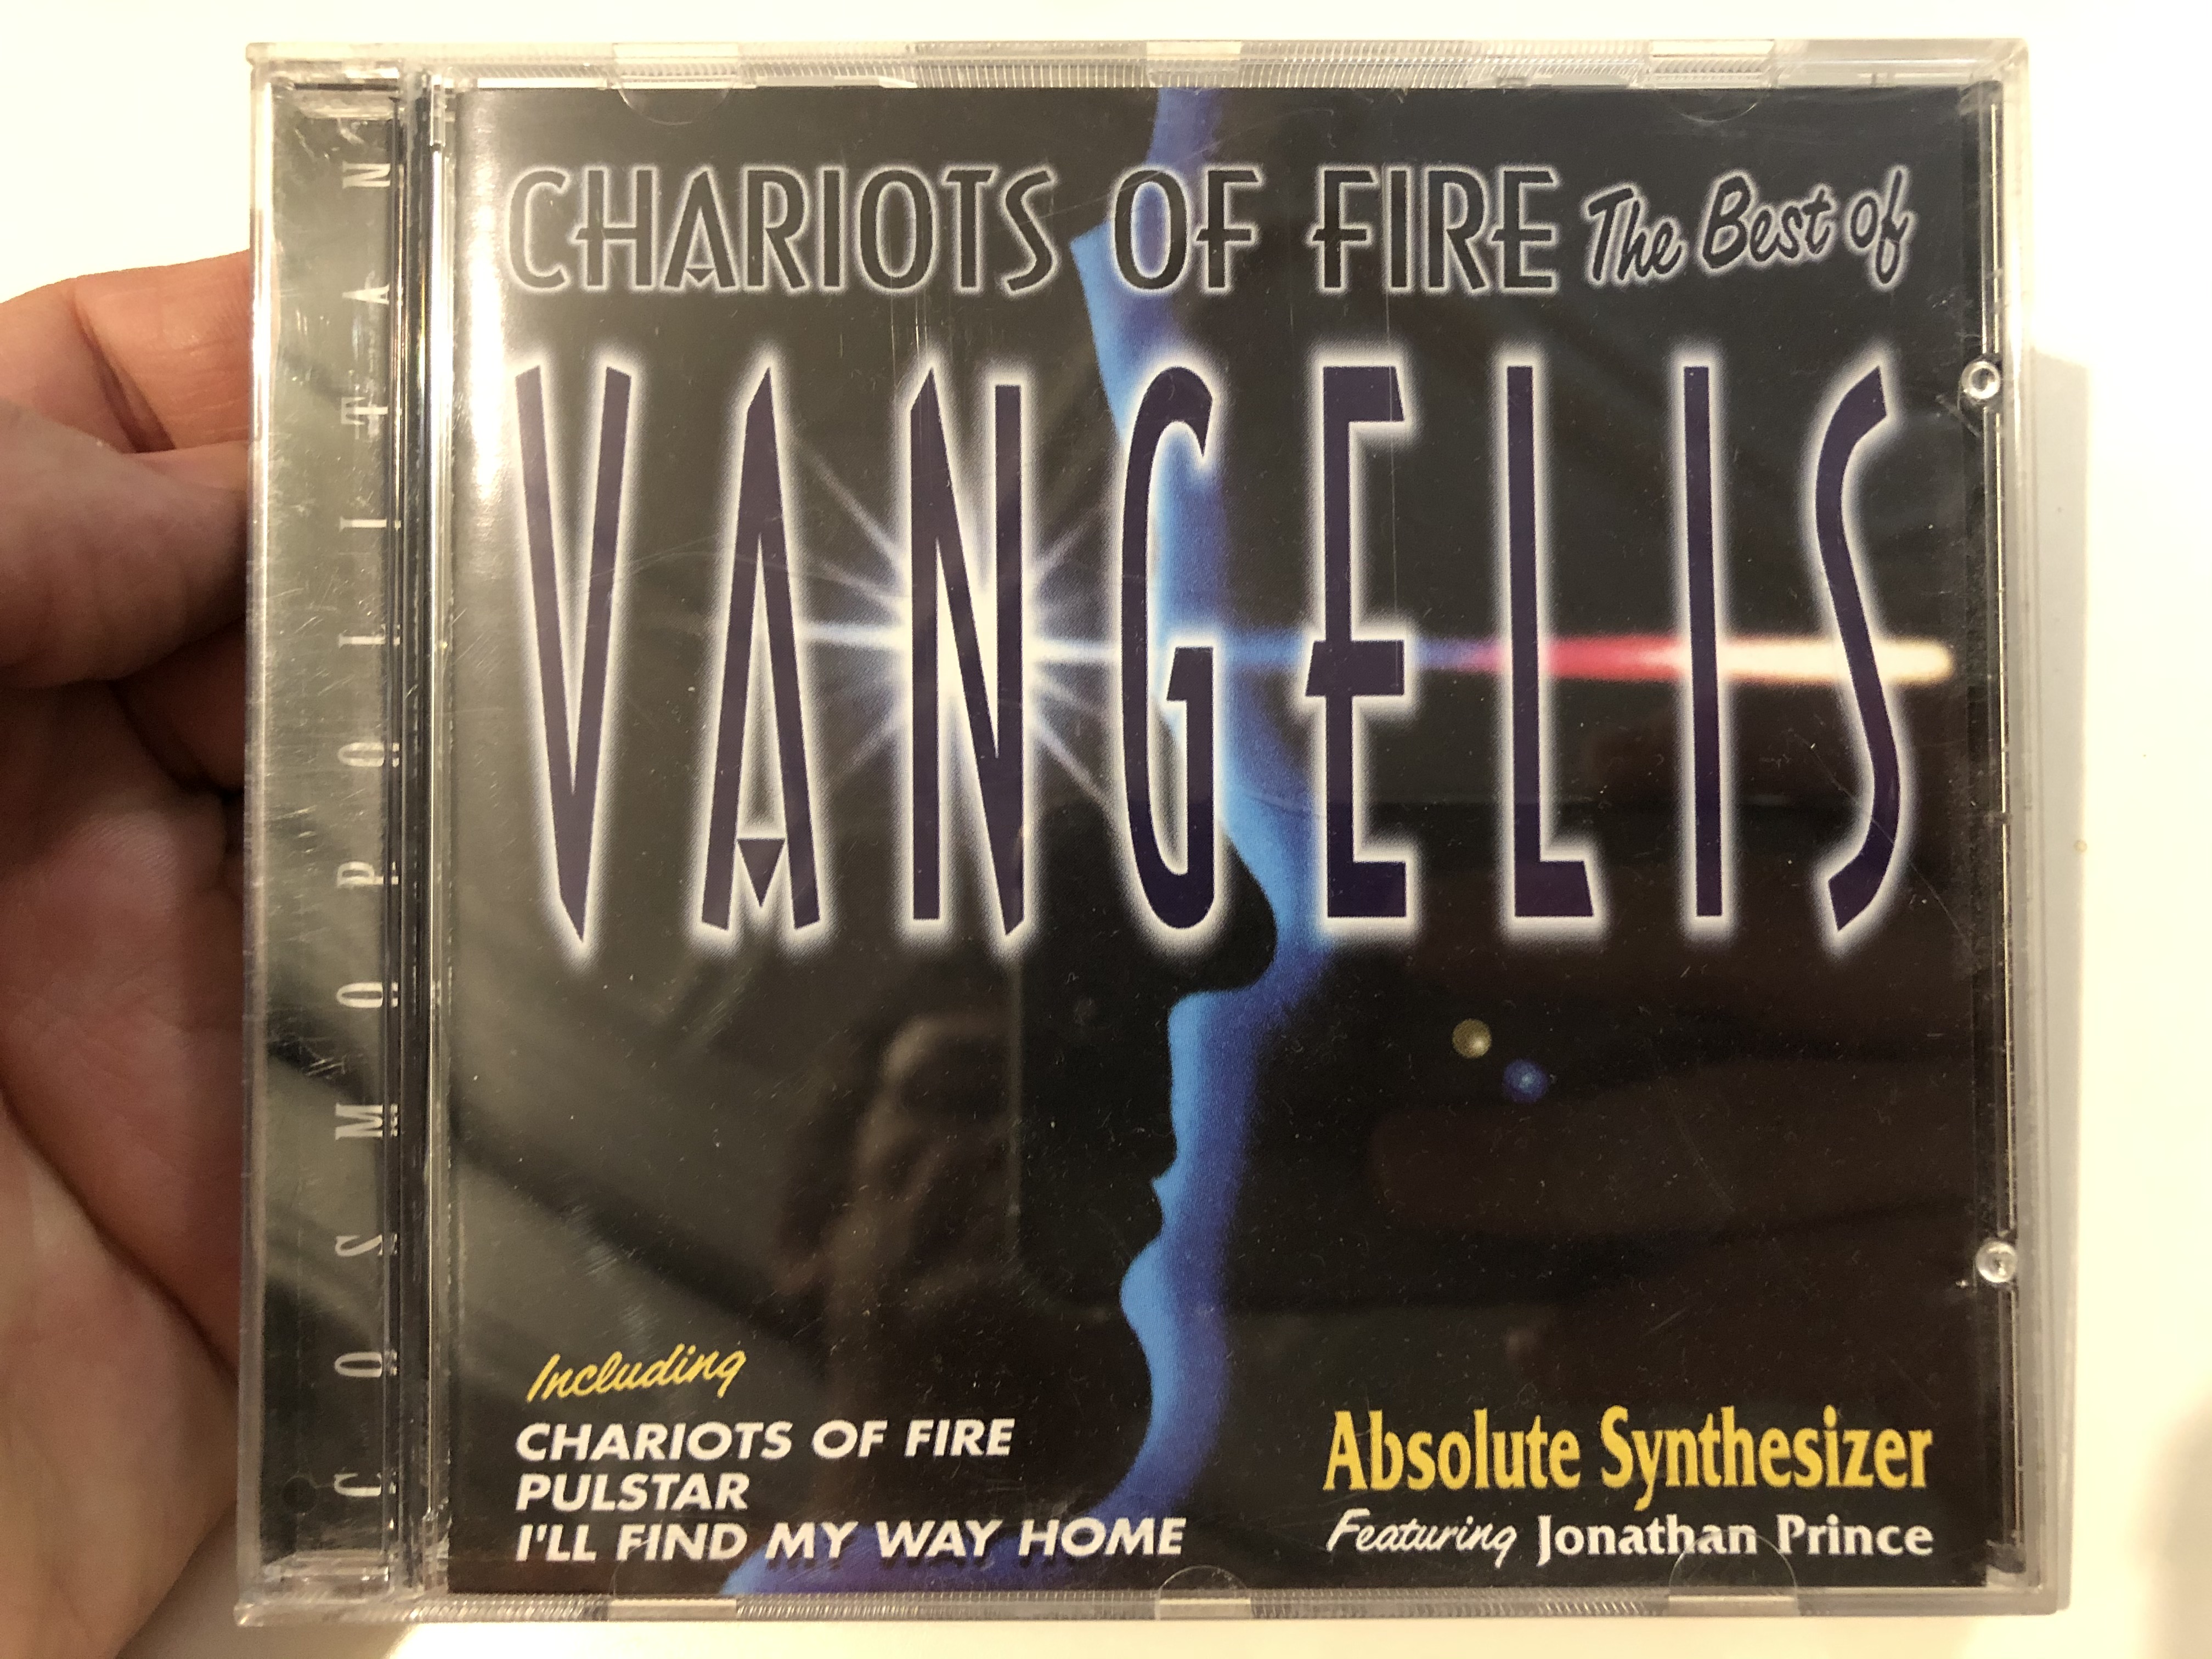 chariots-of-fire-the-best-of-vangelis-including-chariots-of-fire-pulstar-i-ll-find-my-way-home-absolute-synthesizer-featuring-jonathan-prince-cosmpolitan-audio-cd-1999-40536-2-1-.jpg